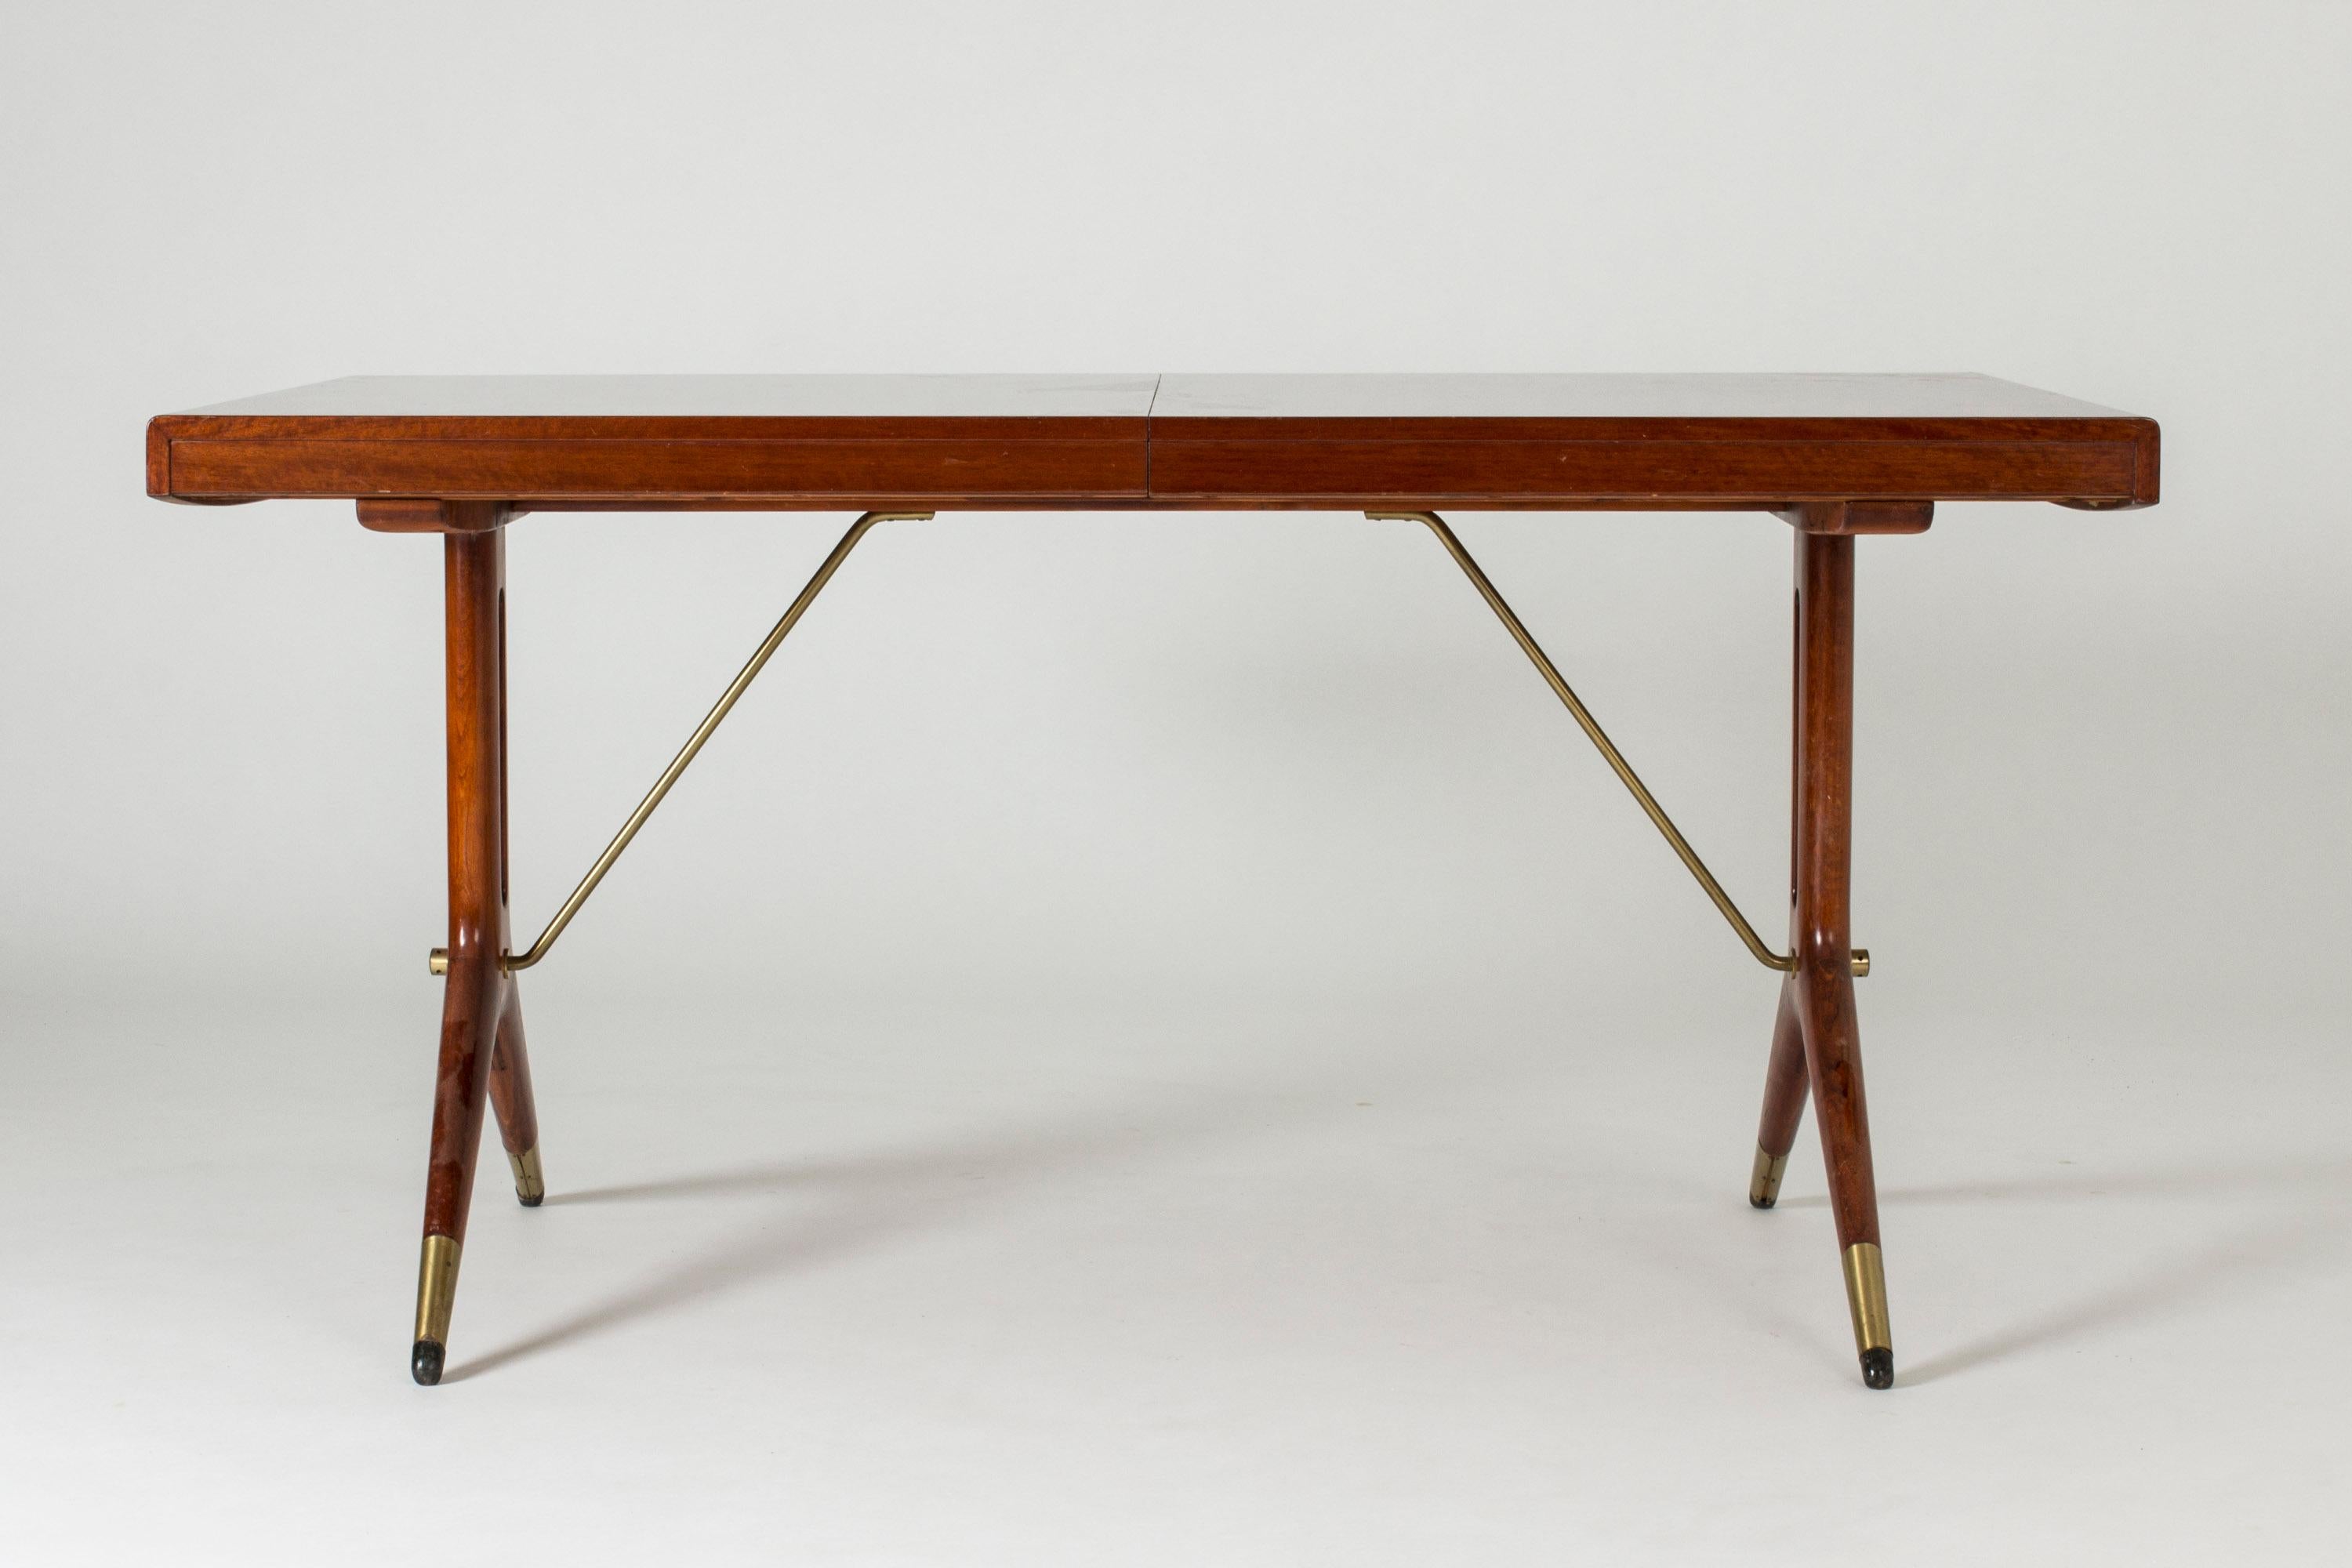 Beautiful mahogany dining table by David Rosén for Nordiska Kompaniet. Y-shaped legs and brass rods balancing the table give it an elegant and unique Silhouette. Two inlays measuring 45 cm each.